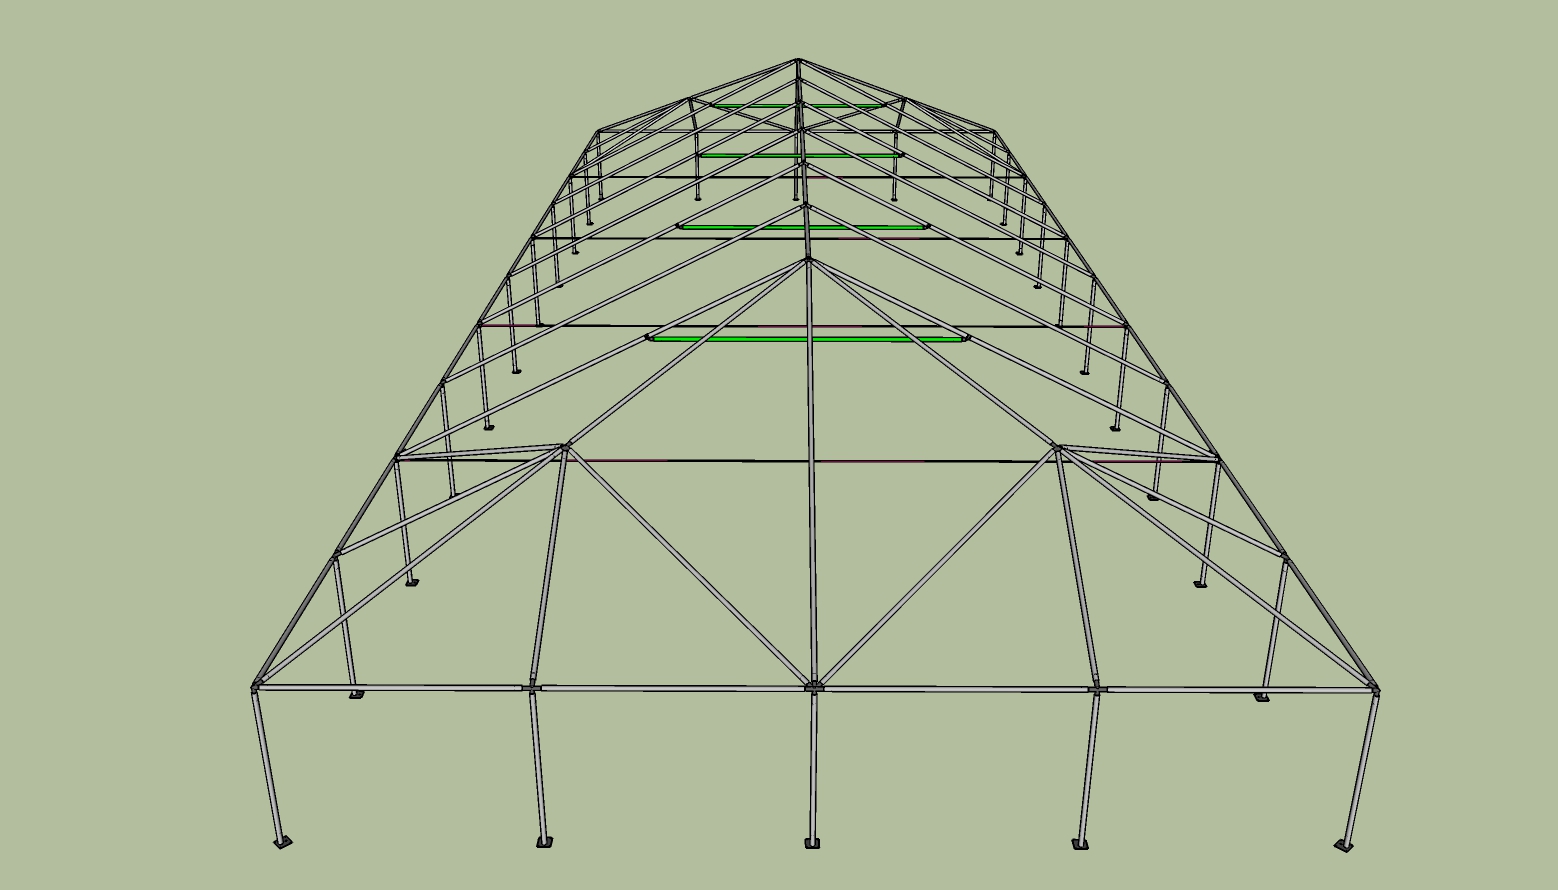 40x100 frame tent side view